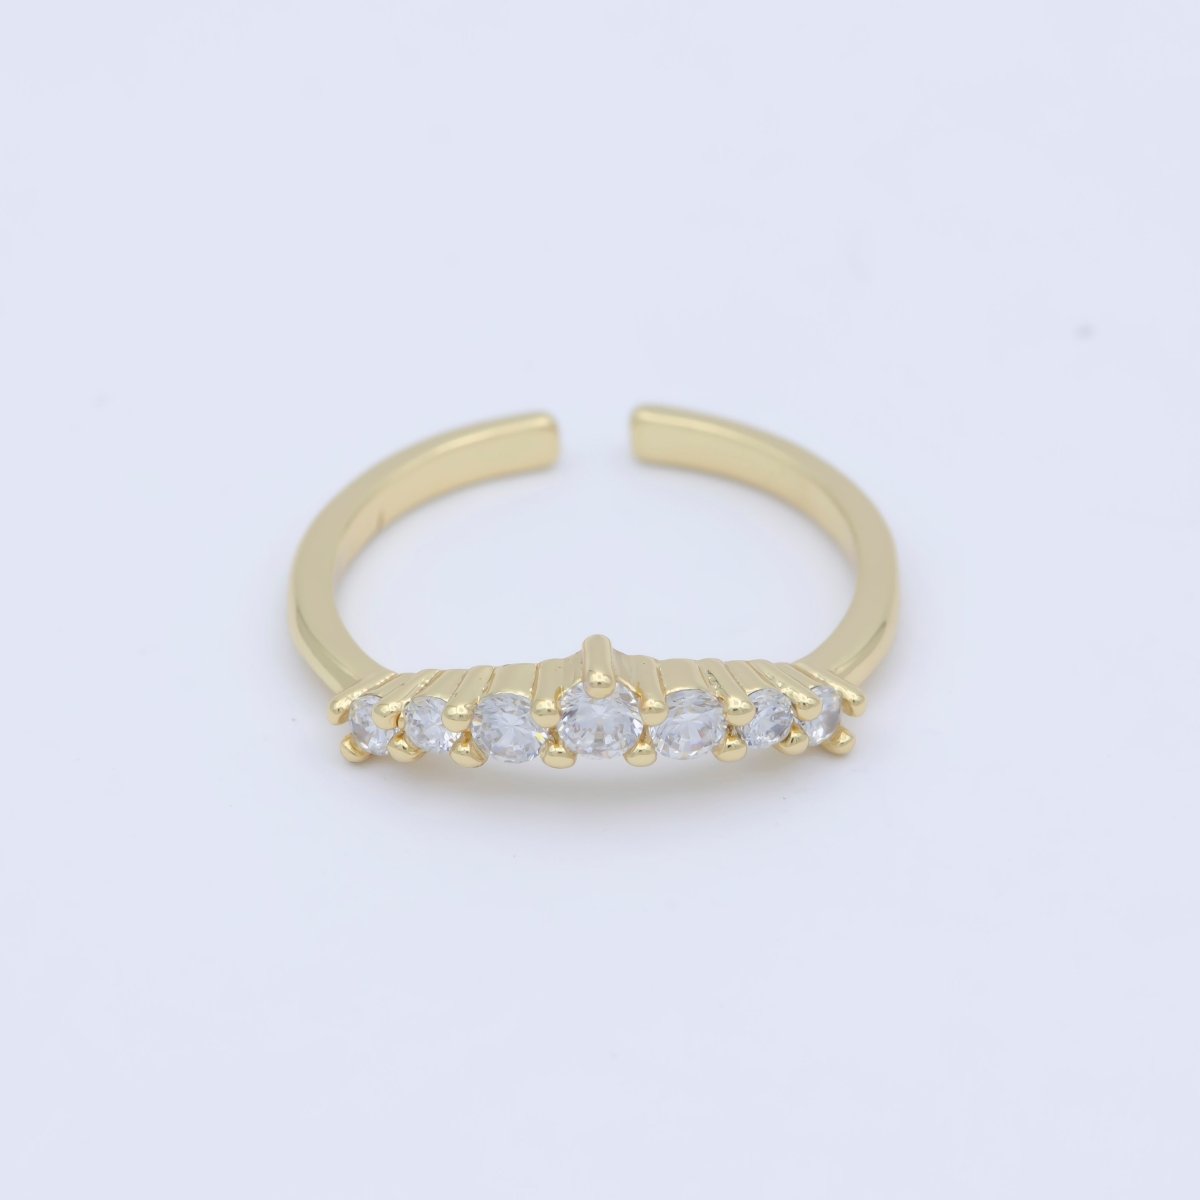 Dainty Clear Cz Stone Stackable Open Adjustable Ring in 18k Gold Filled Minimalist jewelry O-488 - DLUXCA